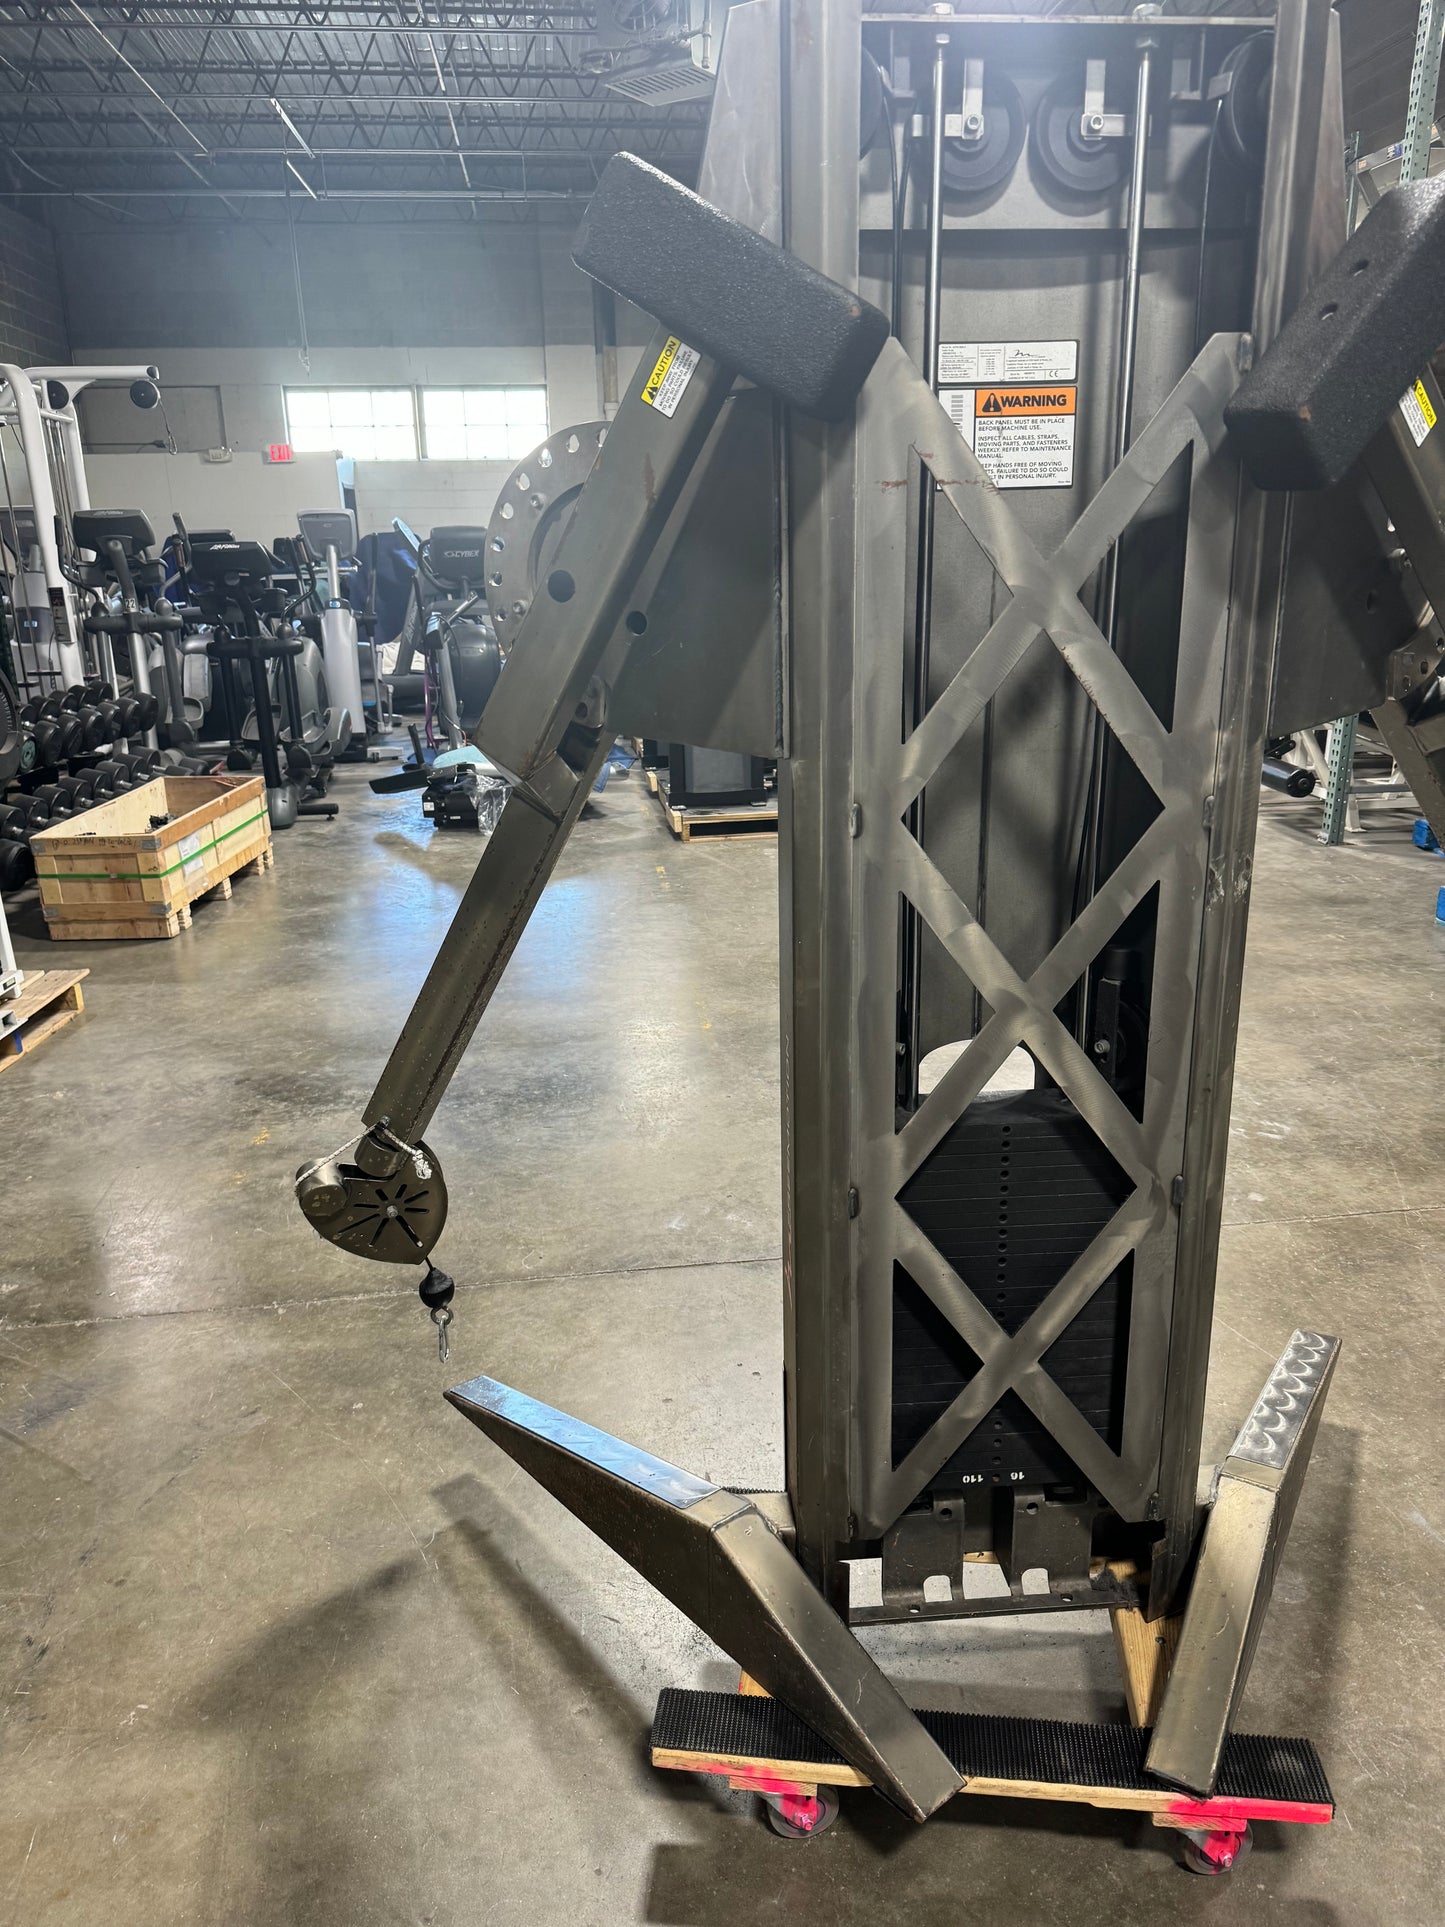 Freemotion Cable Crossover Functional Trainer